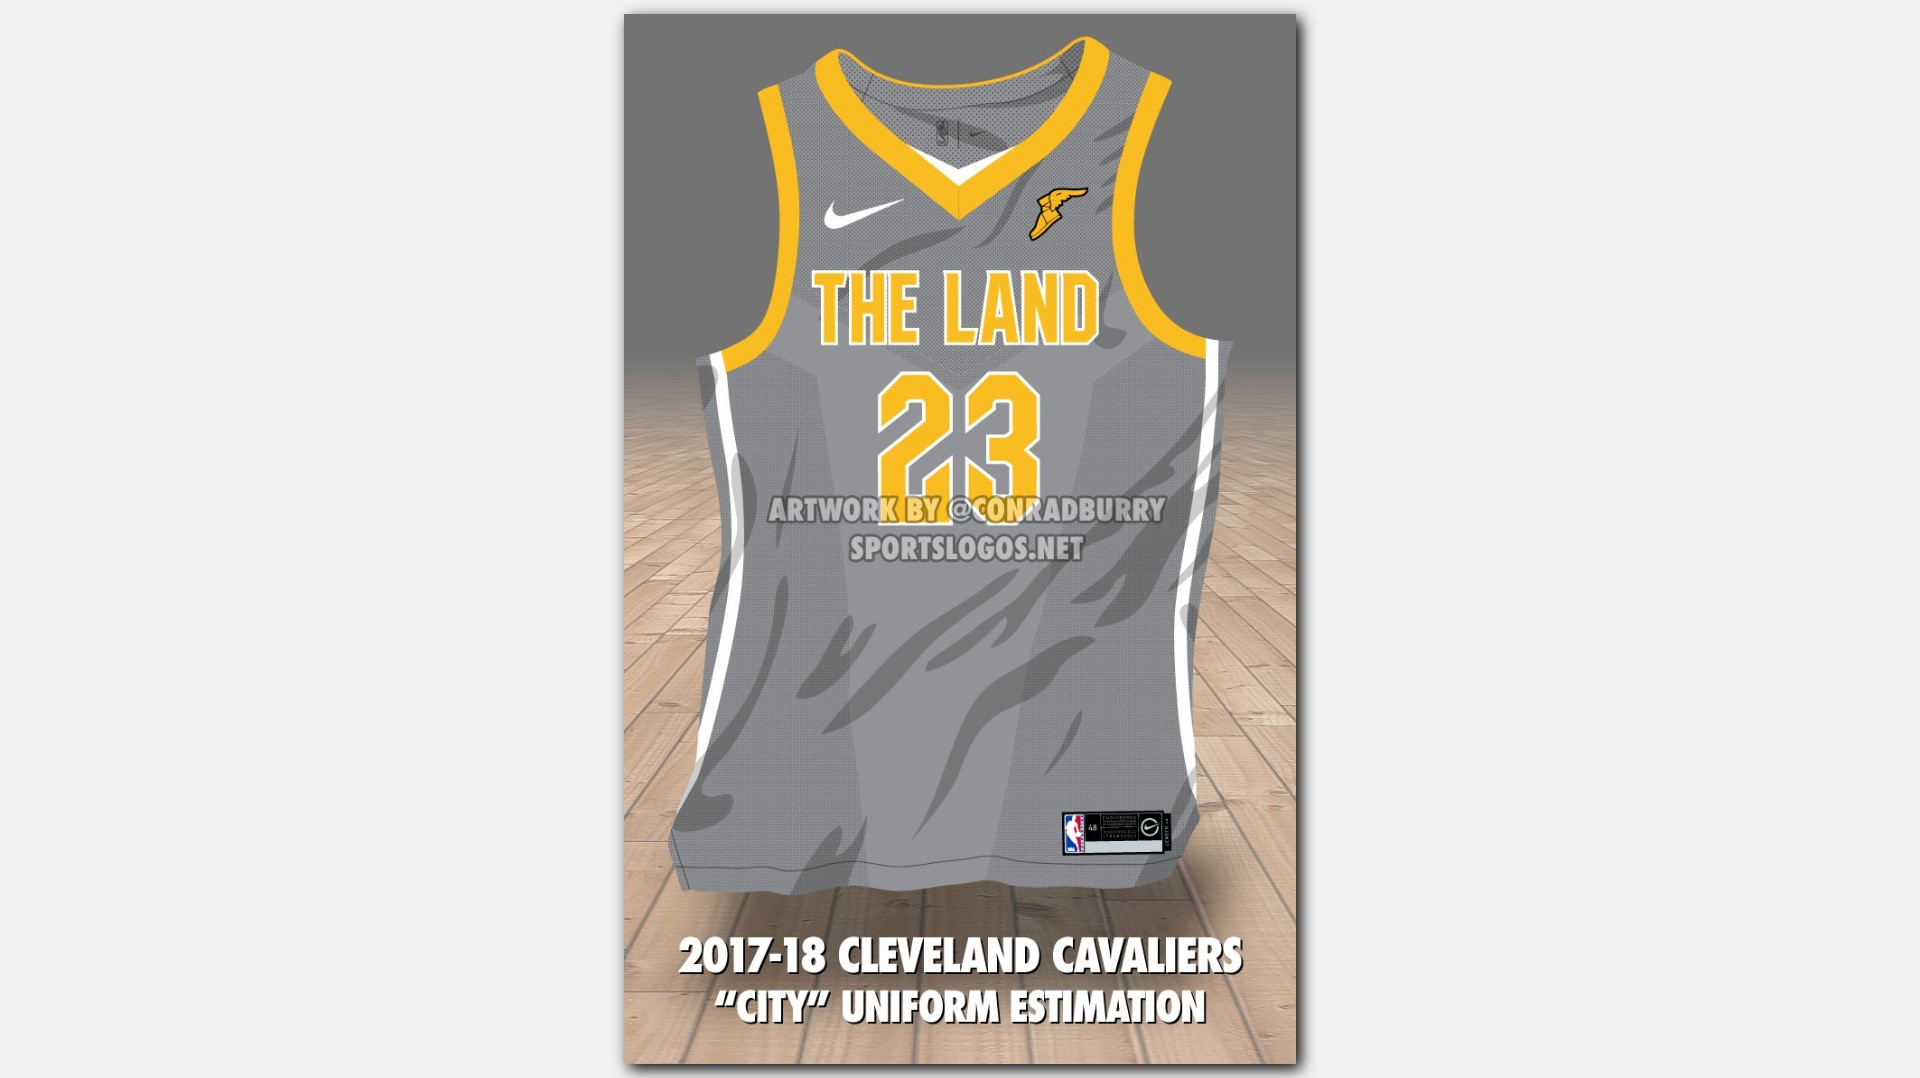 Cleveland Cavaliers to debut City Edition 'The Land' jerseys on